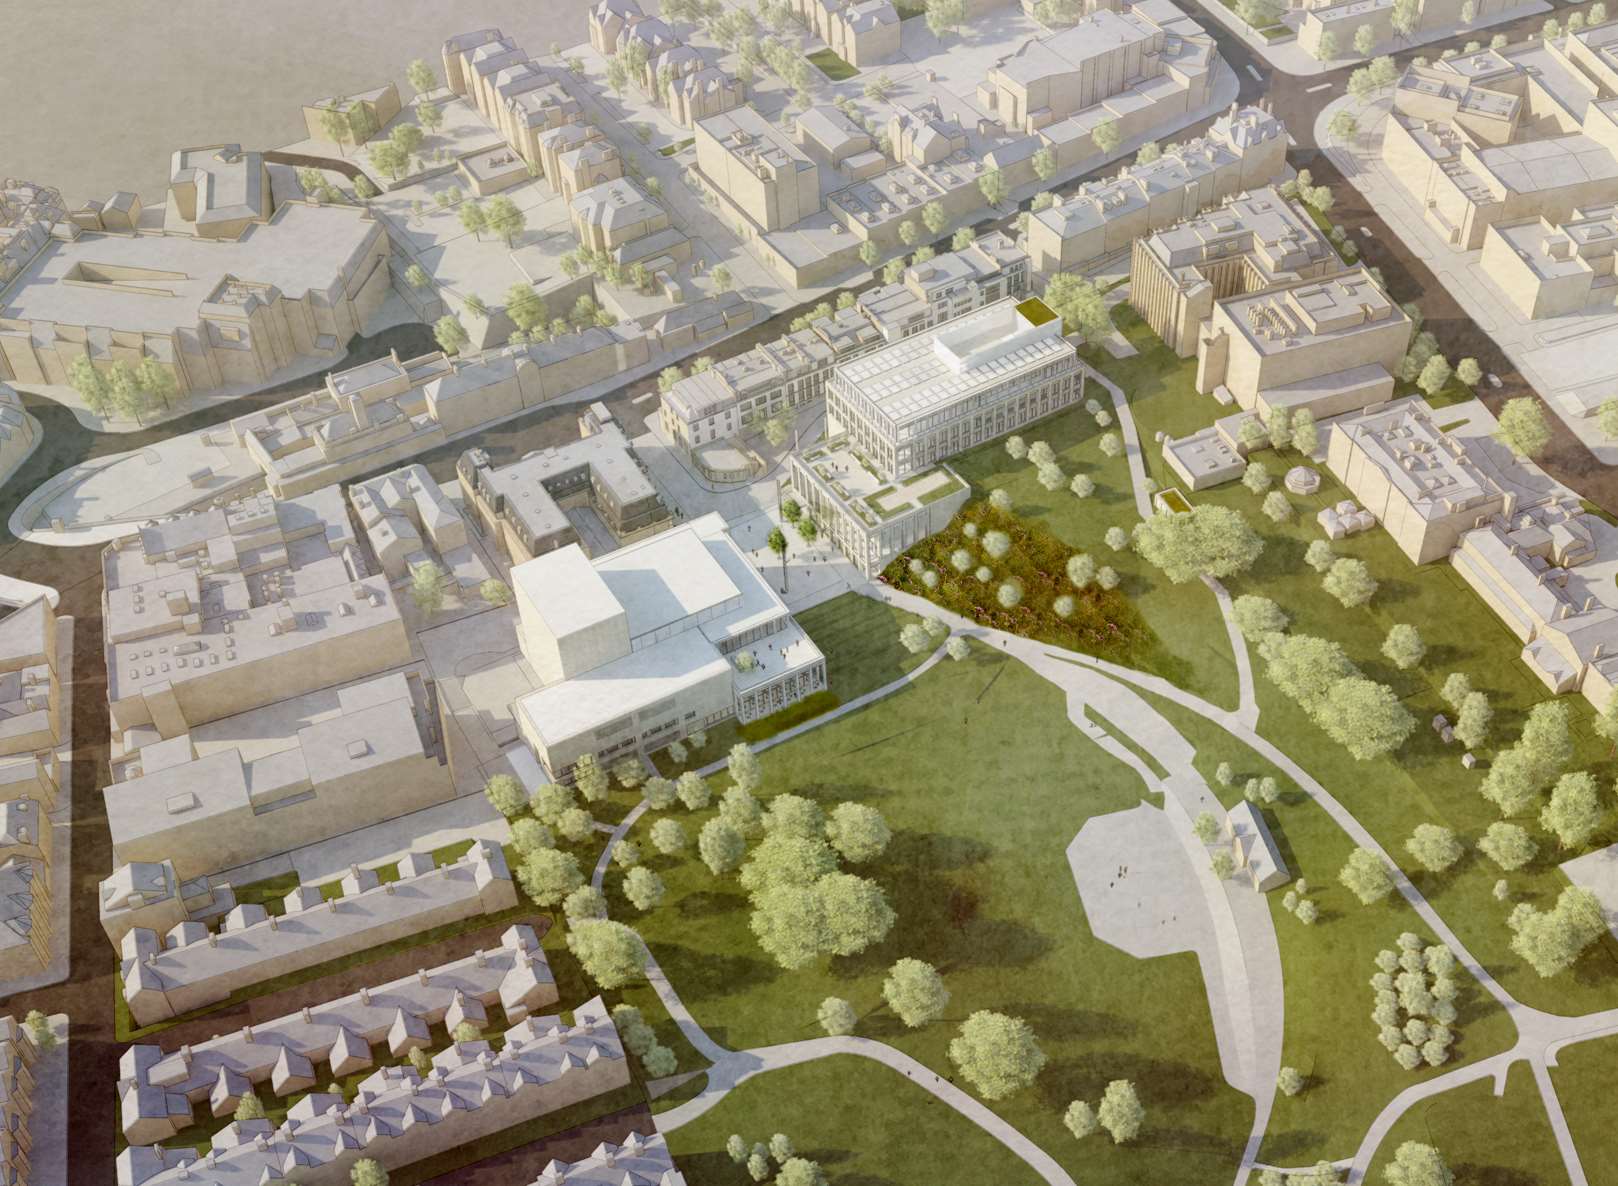 The new civic centre would include a council chamber, flexible spaces, facilities for weddings and offices for private lease in Mount Pleasant Avenue